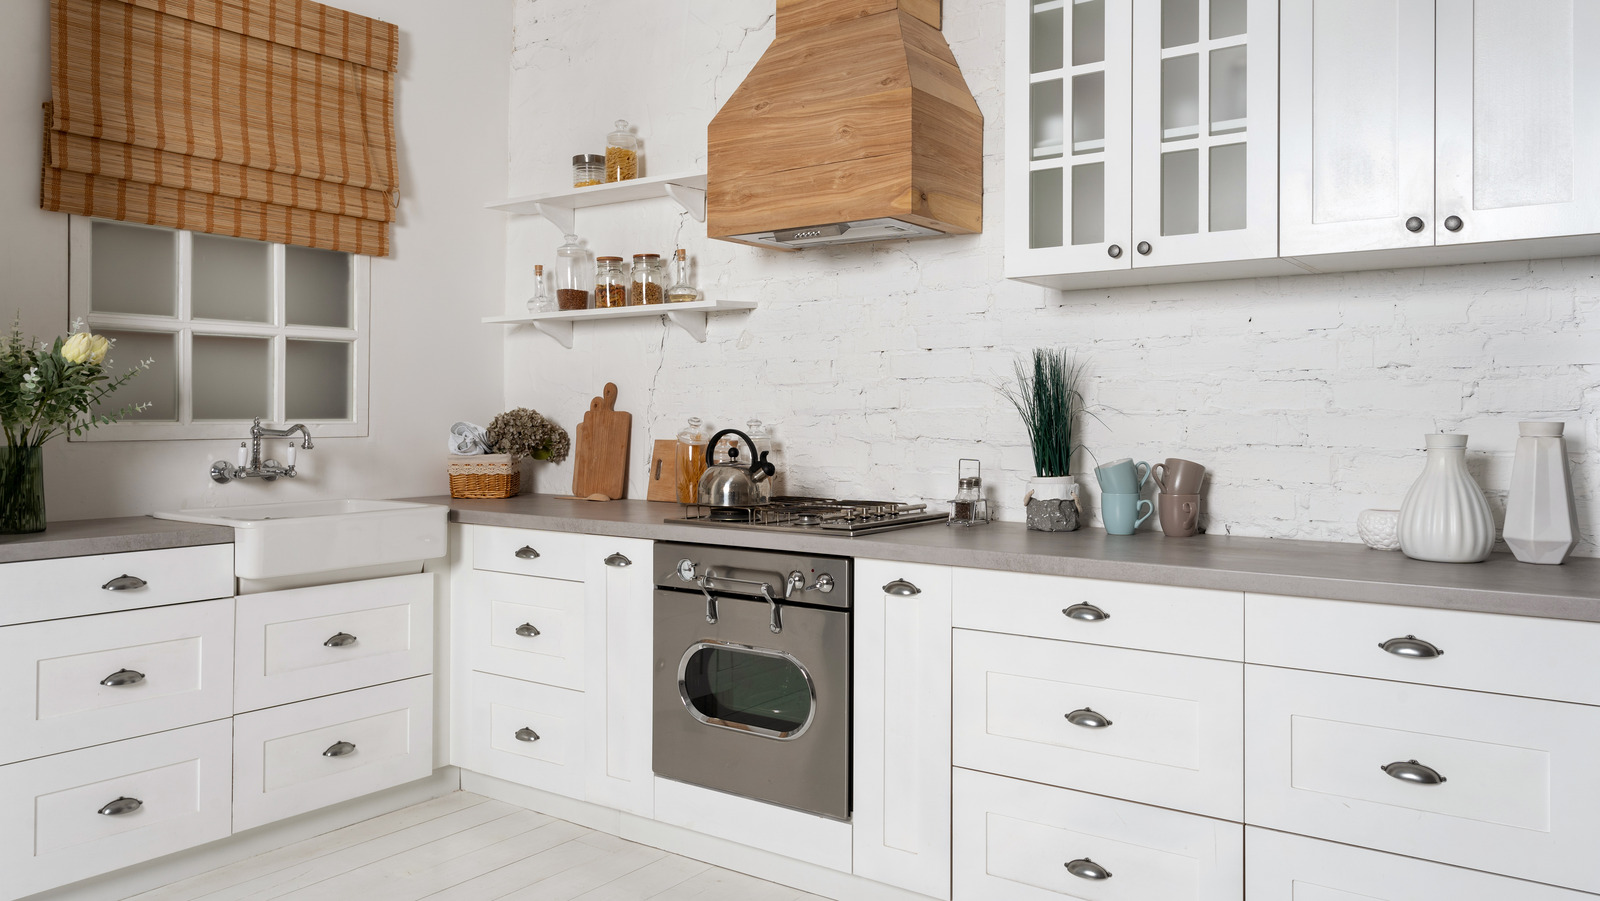 Keeping it organized and budget-friendly with these kitchen organizati